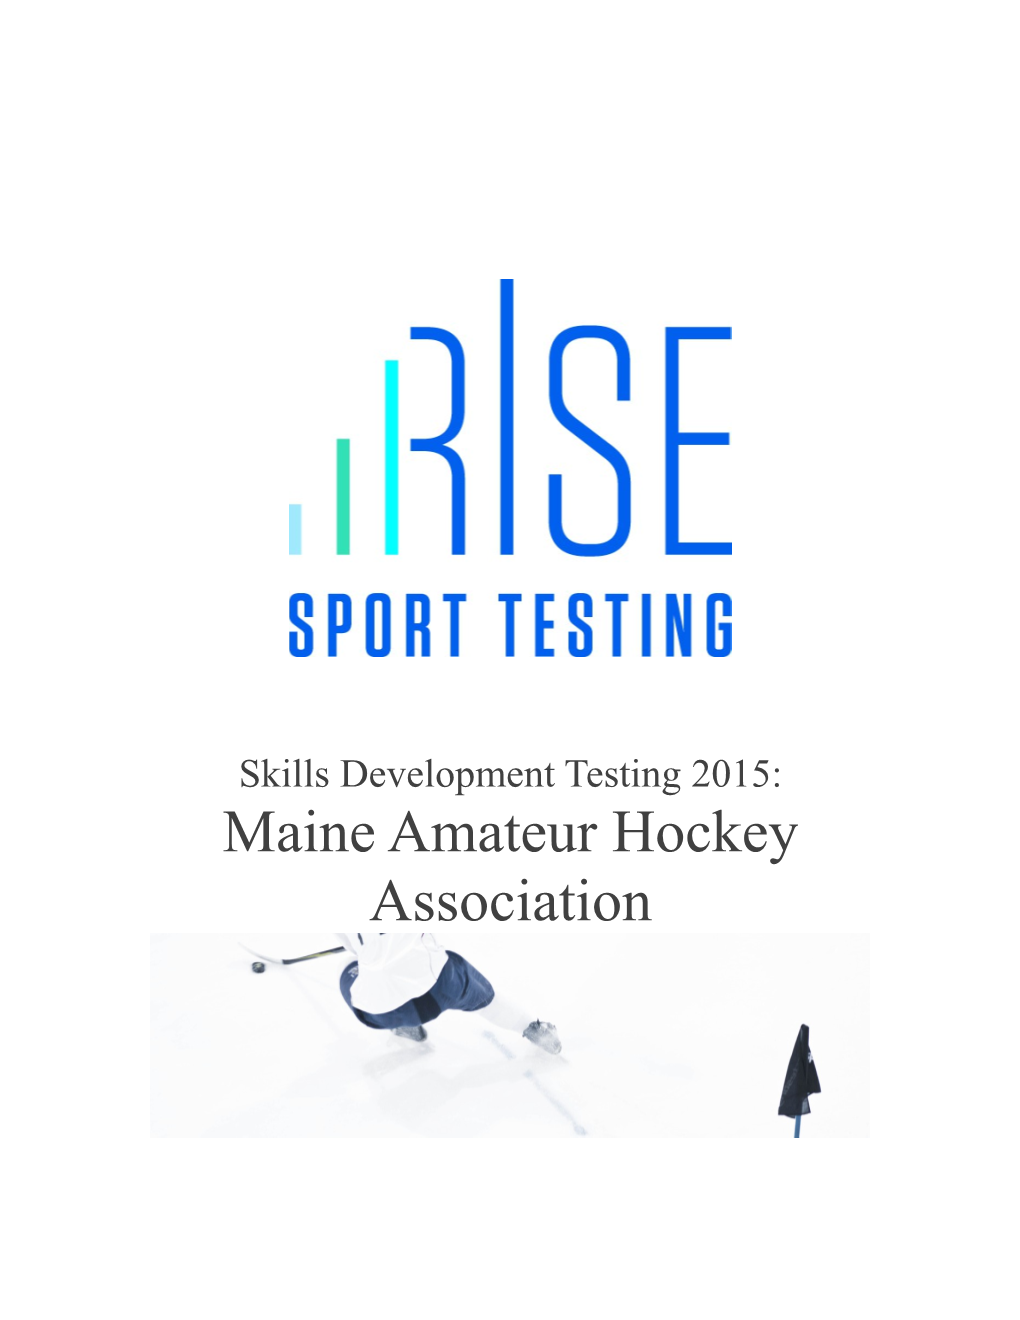 Maine Amateur Hockey Association the IDEA to Provide Your Athletes with a Hockey Specific Skills Report Card to Start Off Their Season